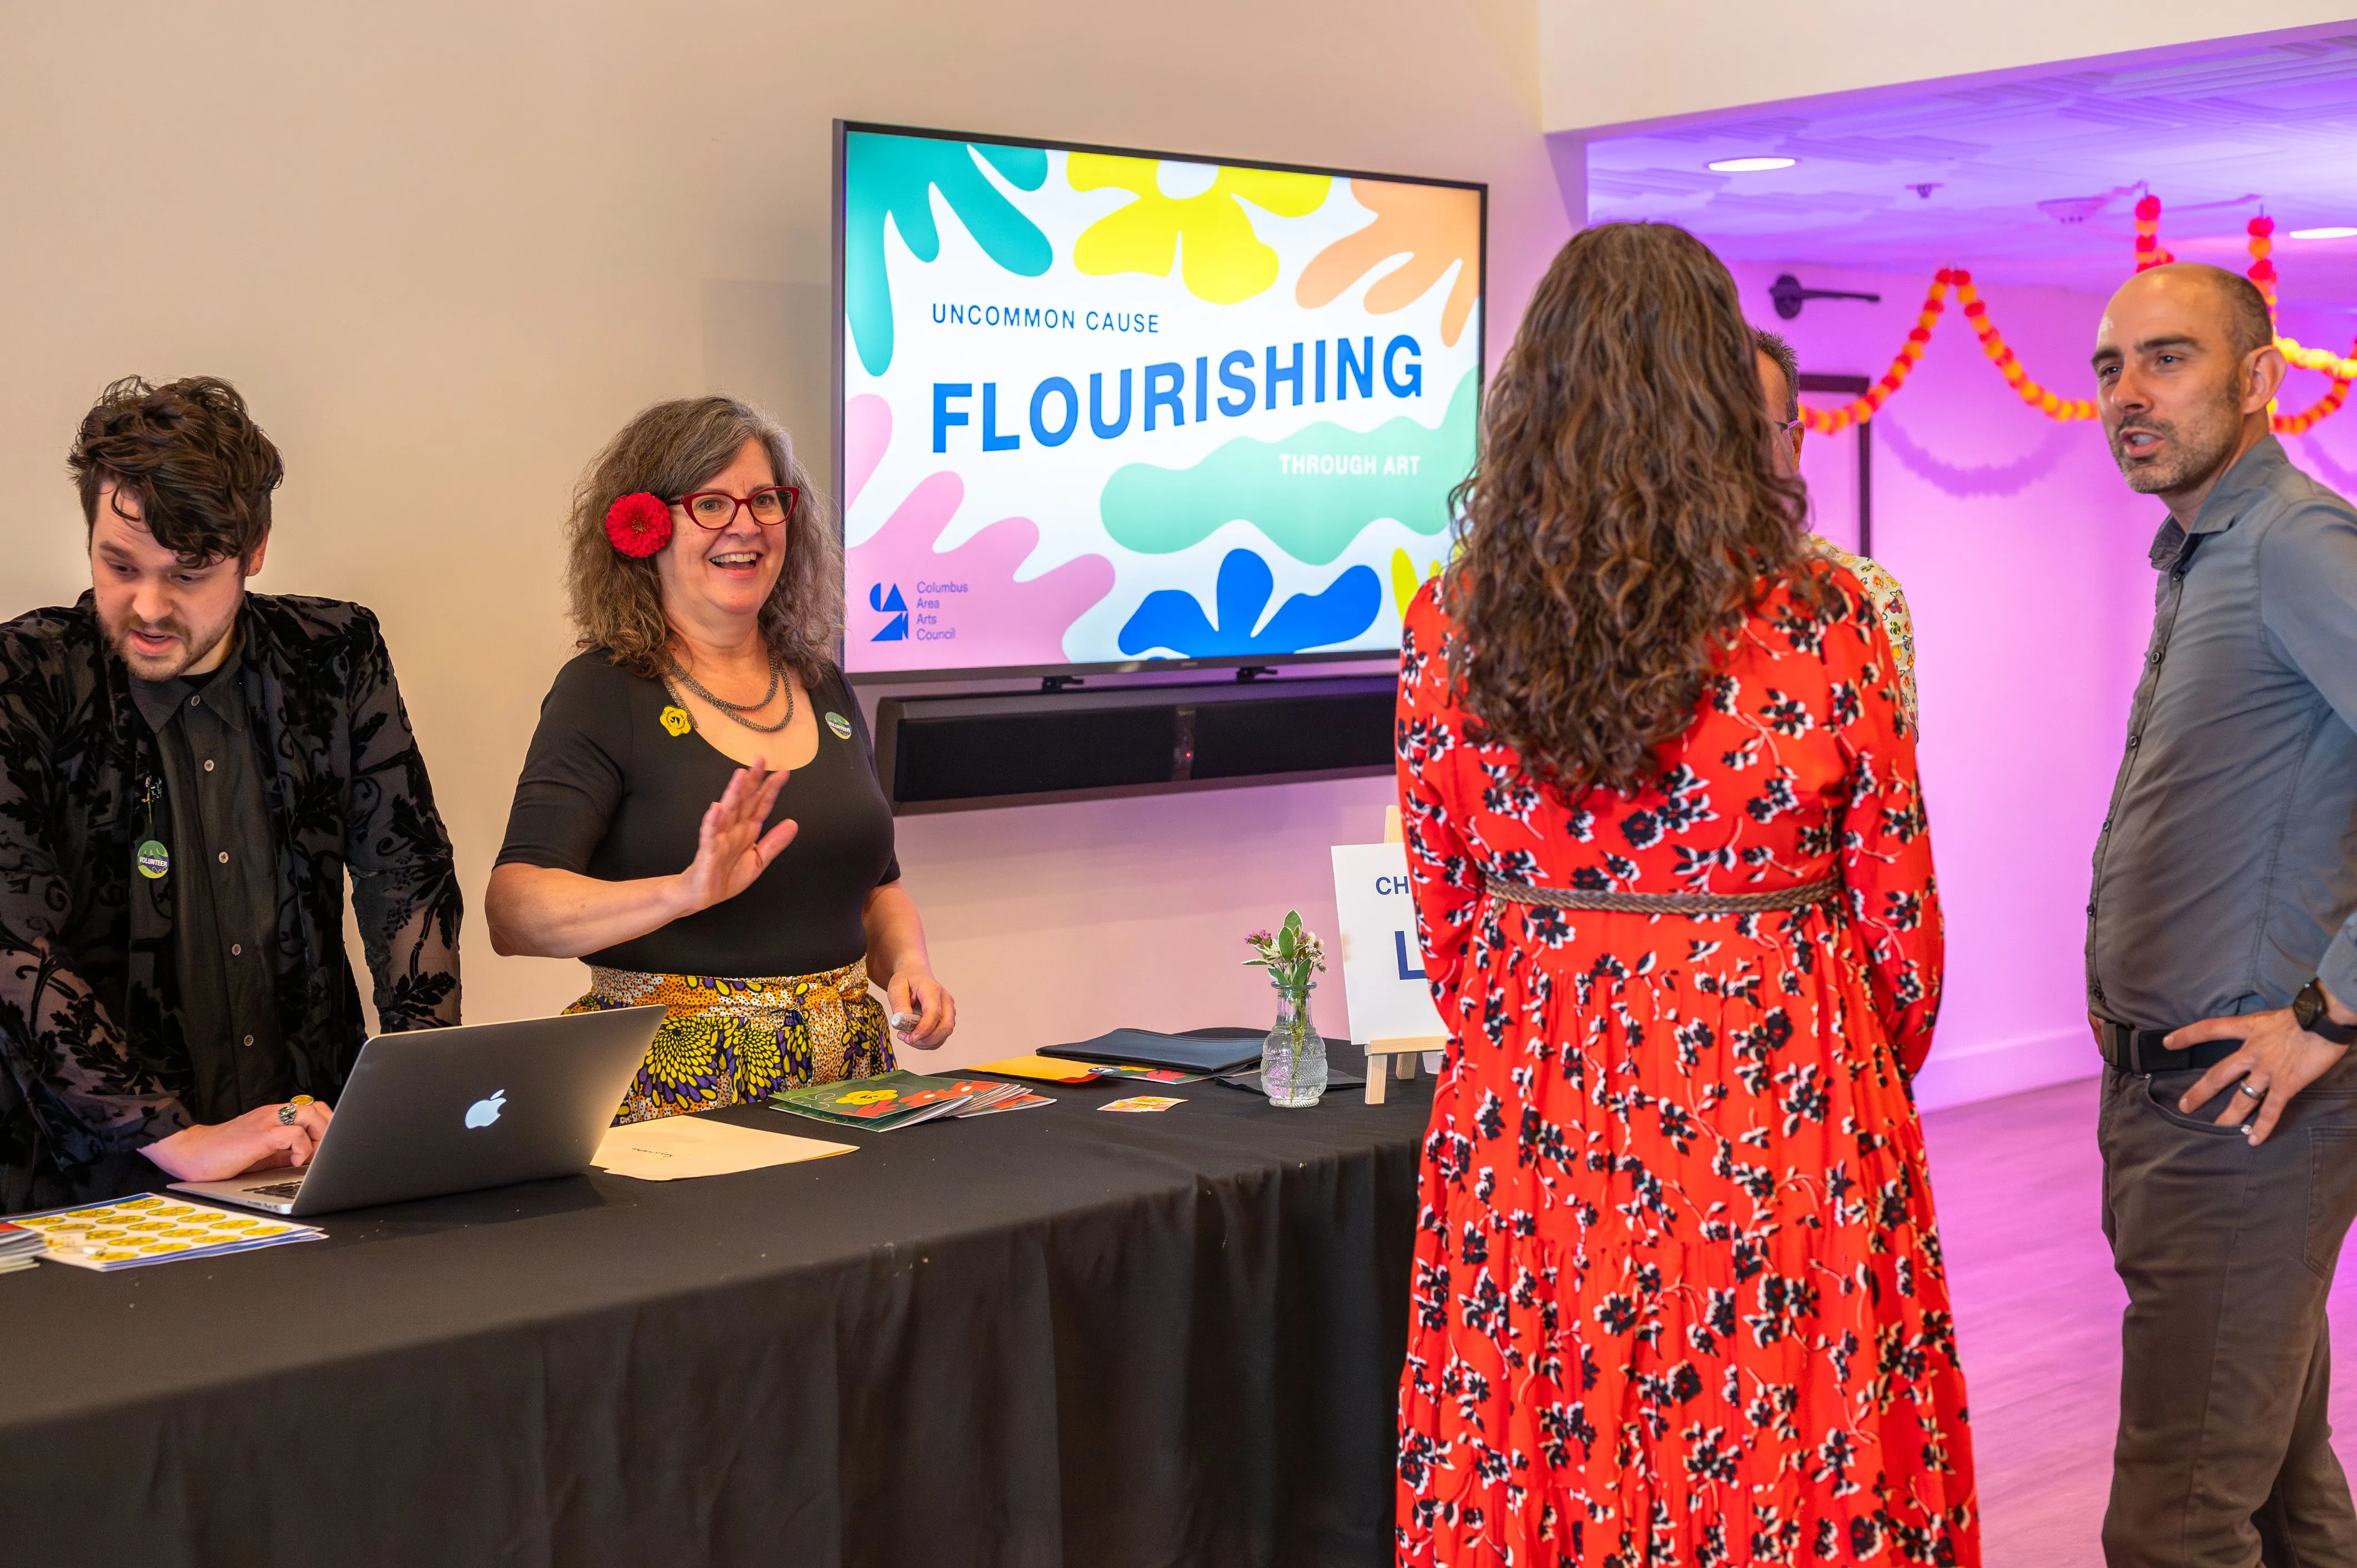 People interacting at a conference registration desk with a "FLOURISHING" sign displayed on a screen in the background.